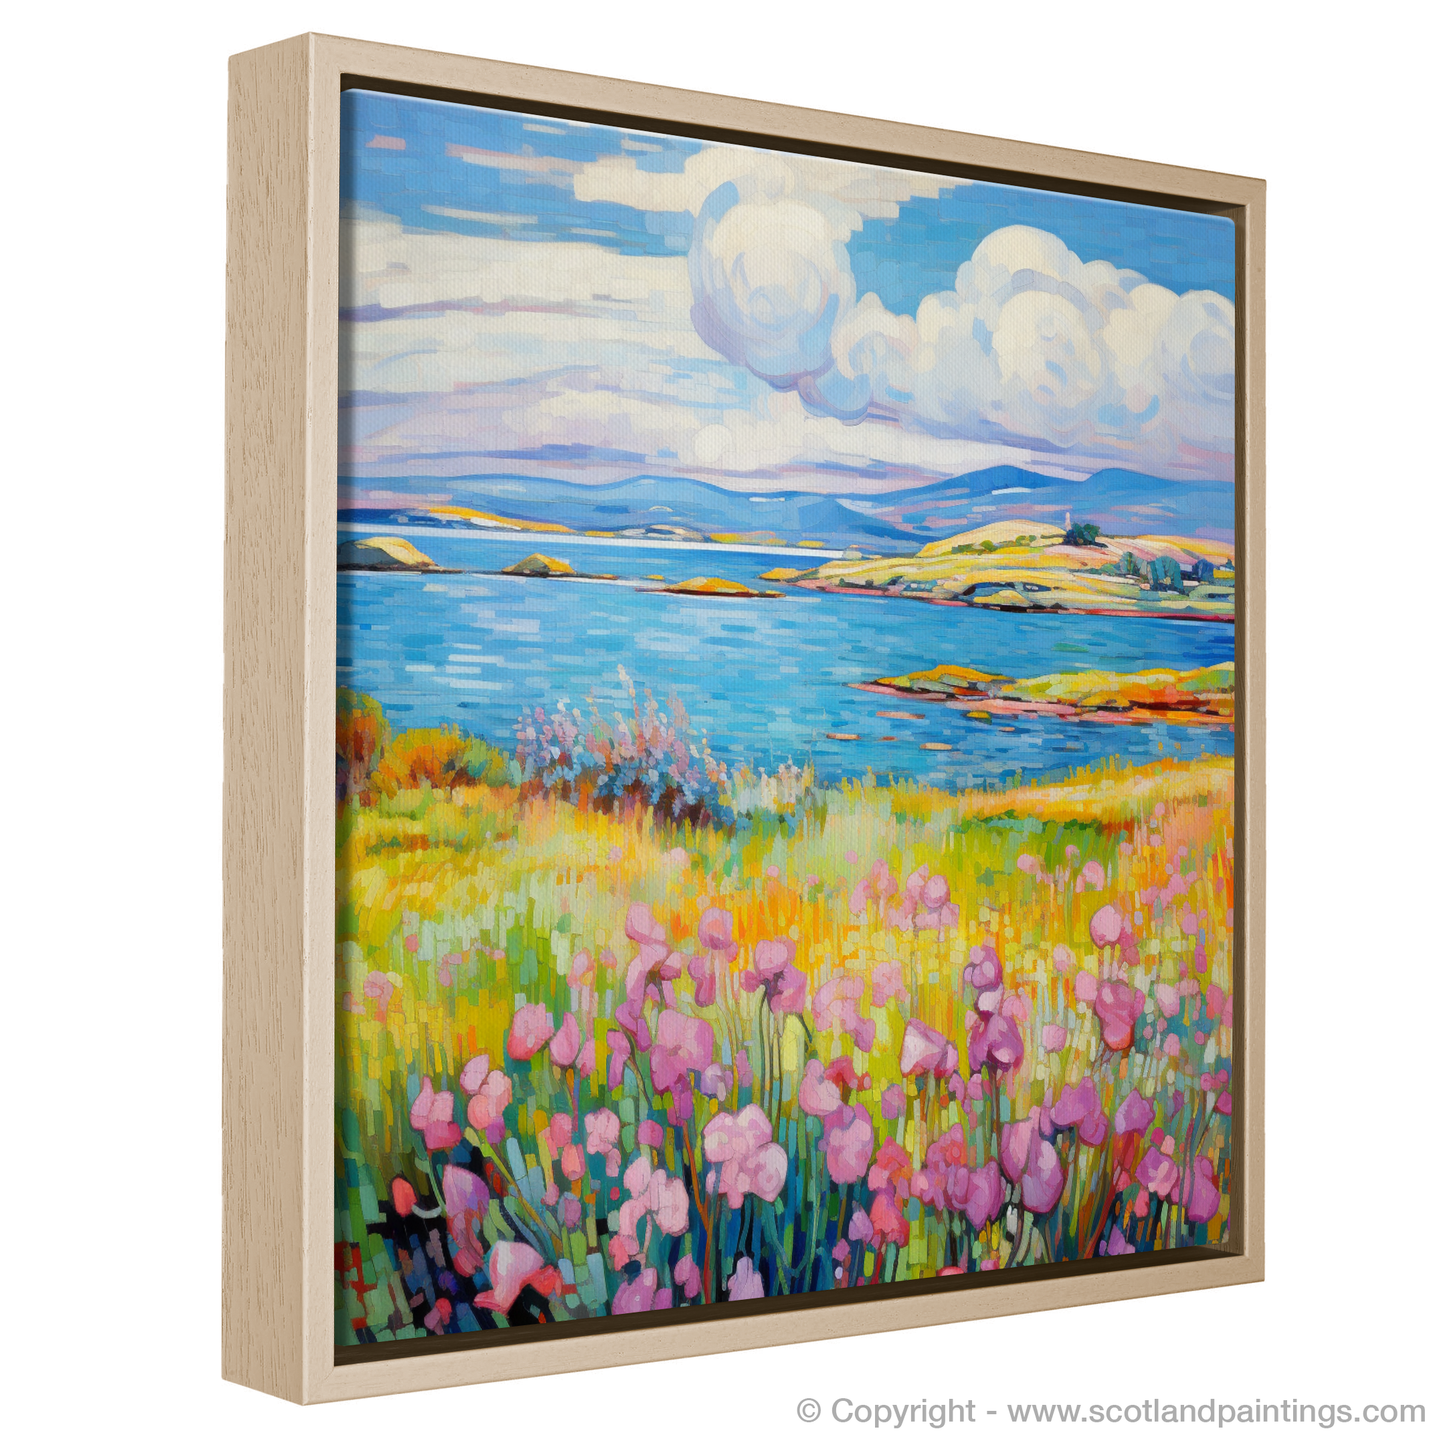 Painting and Art Print of Isle of Gigha, Inner Hebrides in summer entitled "Summer Serenade on the Isle of Gigha".